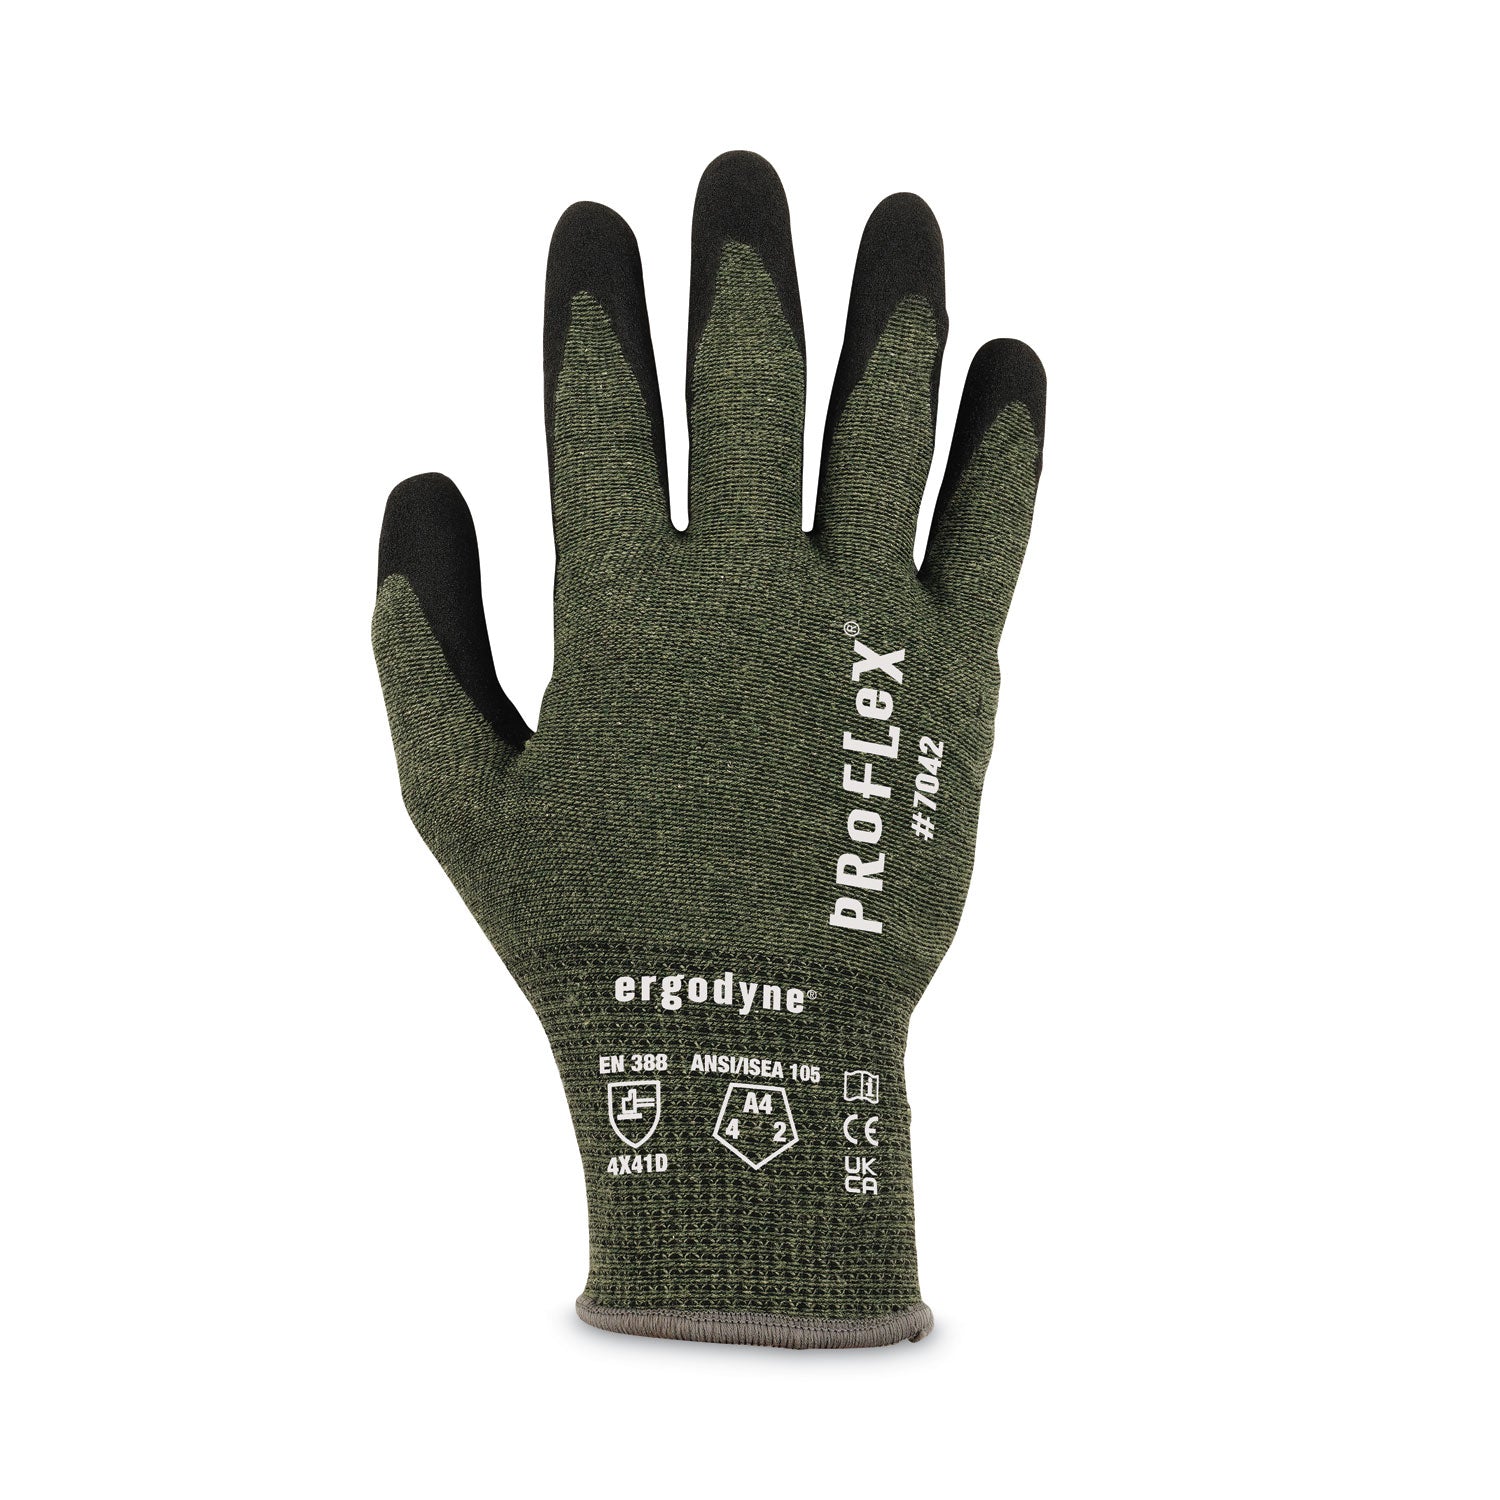 proflex-7042-ansi-a4-nitrile-coated-cr-gloves-green-small-pair-ships-in-1-3-business-days_ego10342 - 7